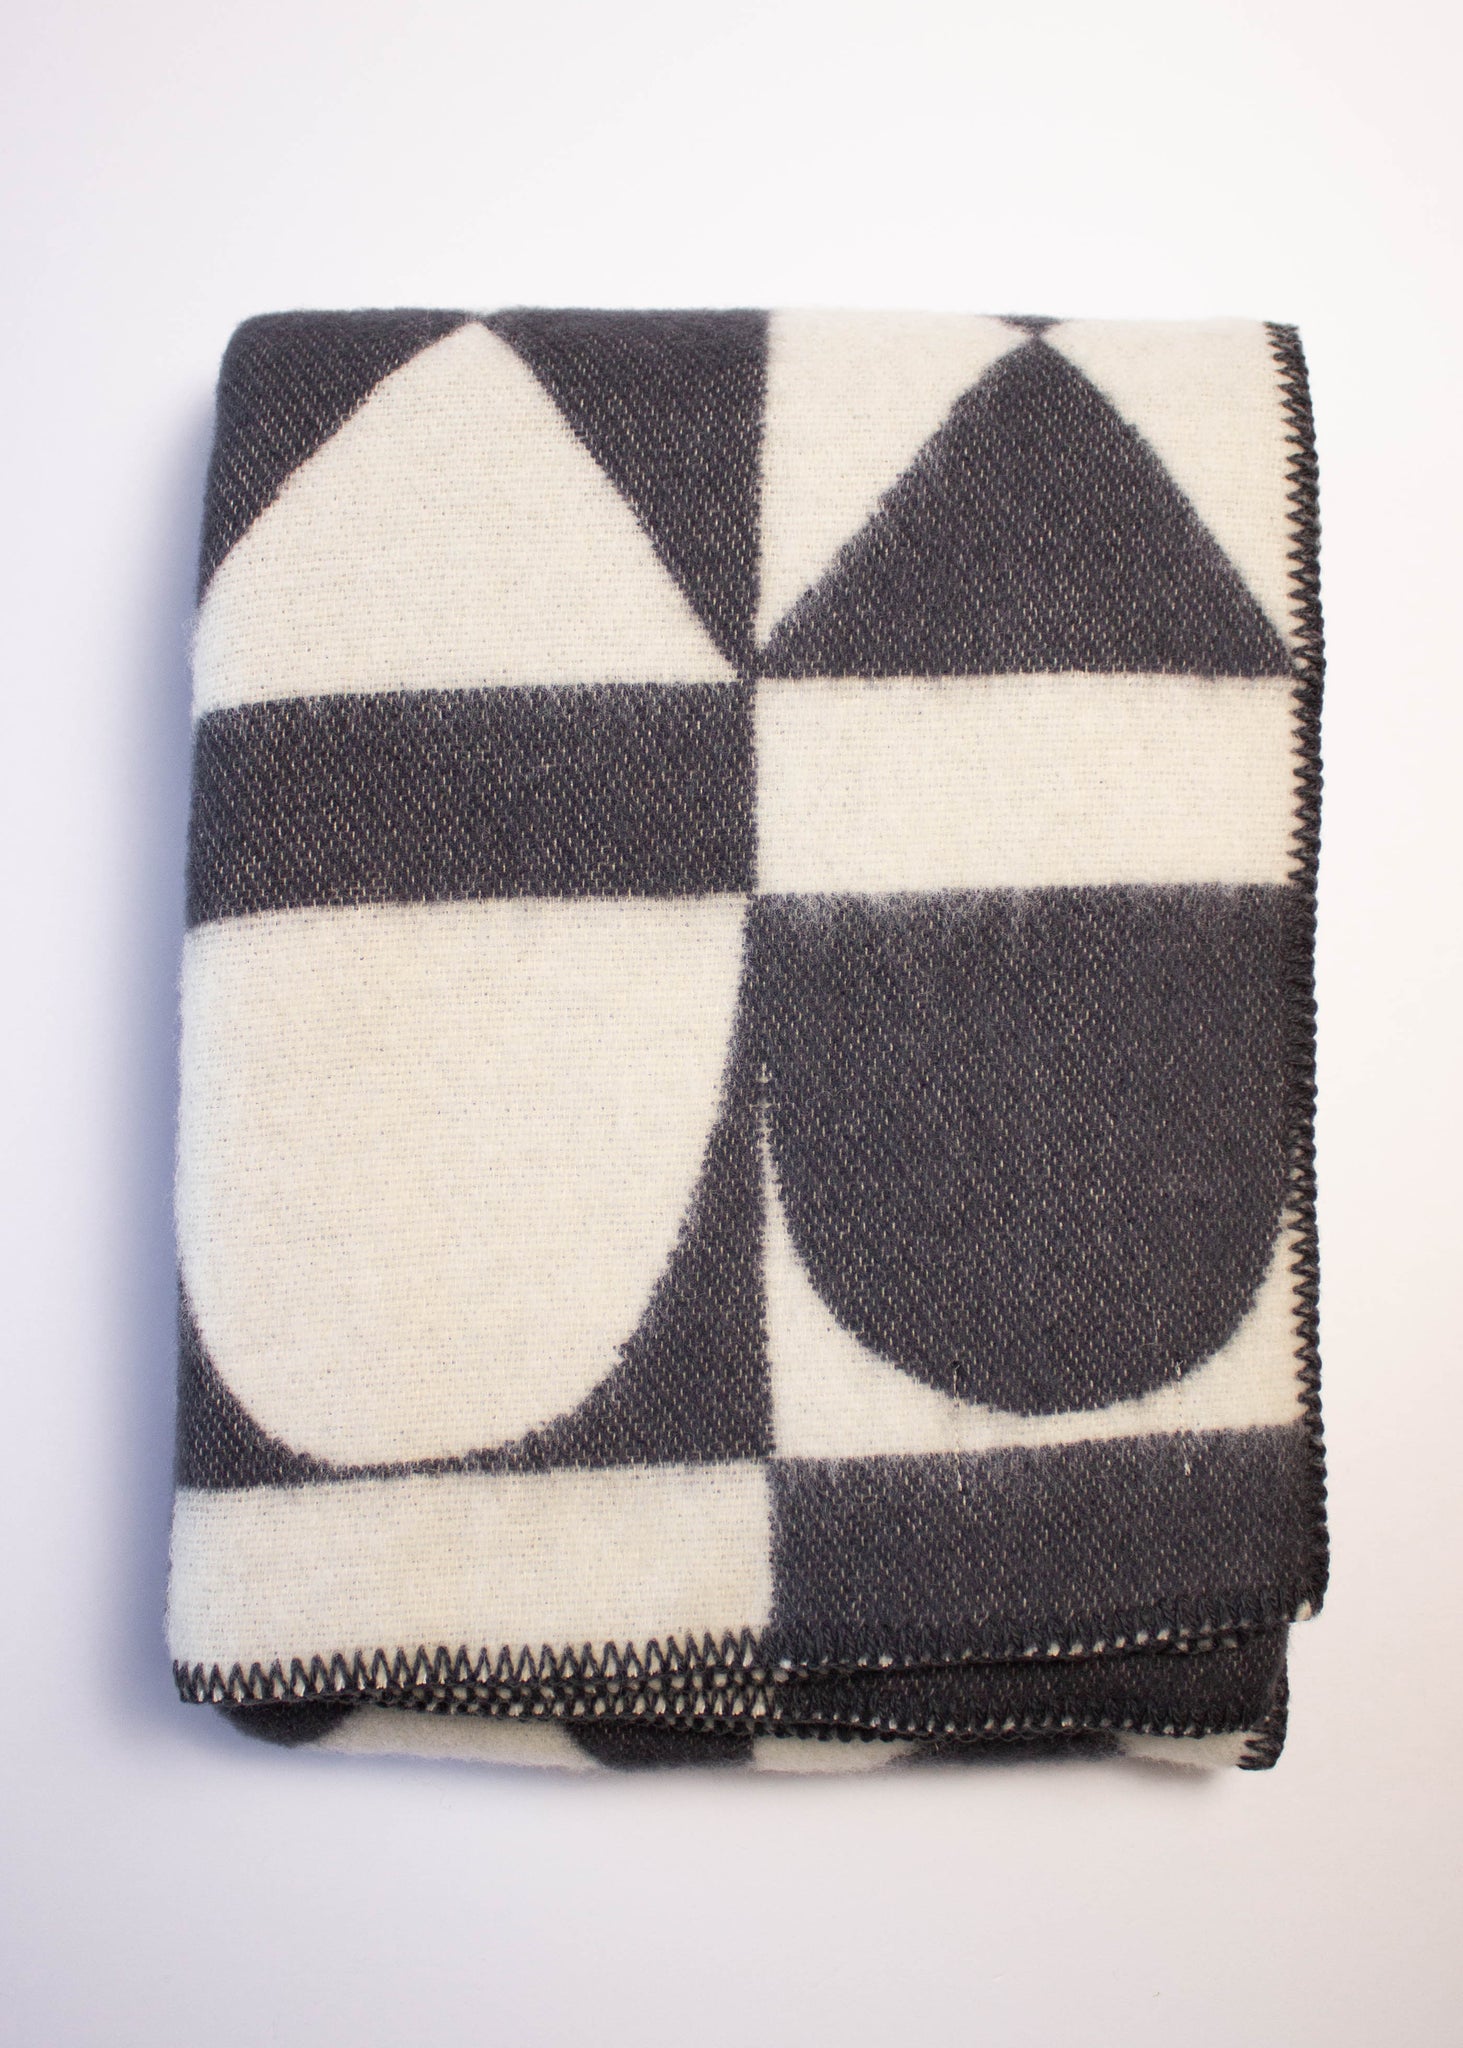 Bows Cream and Grey Throw Blanket